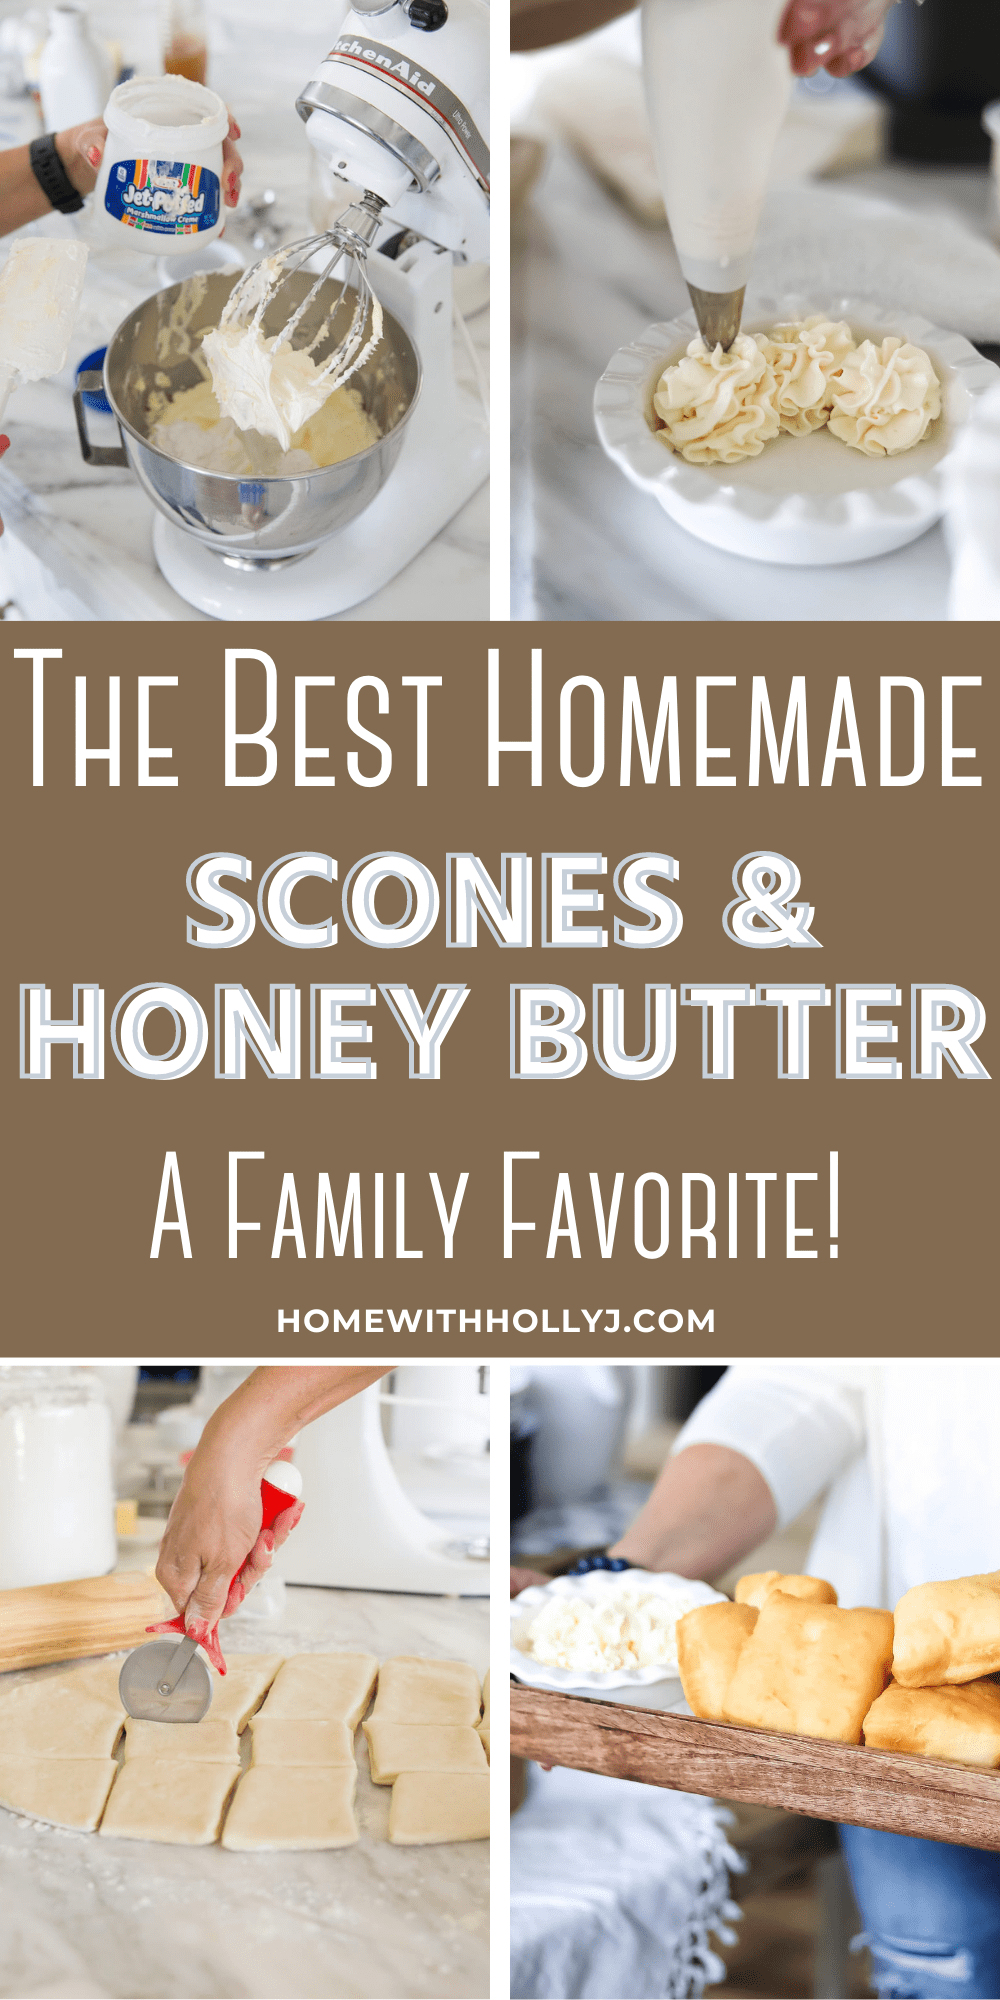 In Utah, deep-fried bread is called a scone. Top the scone with this amazingly delicious honey butter and you have a match made in heaven.